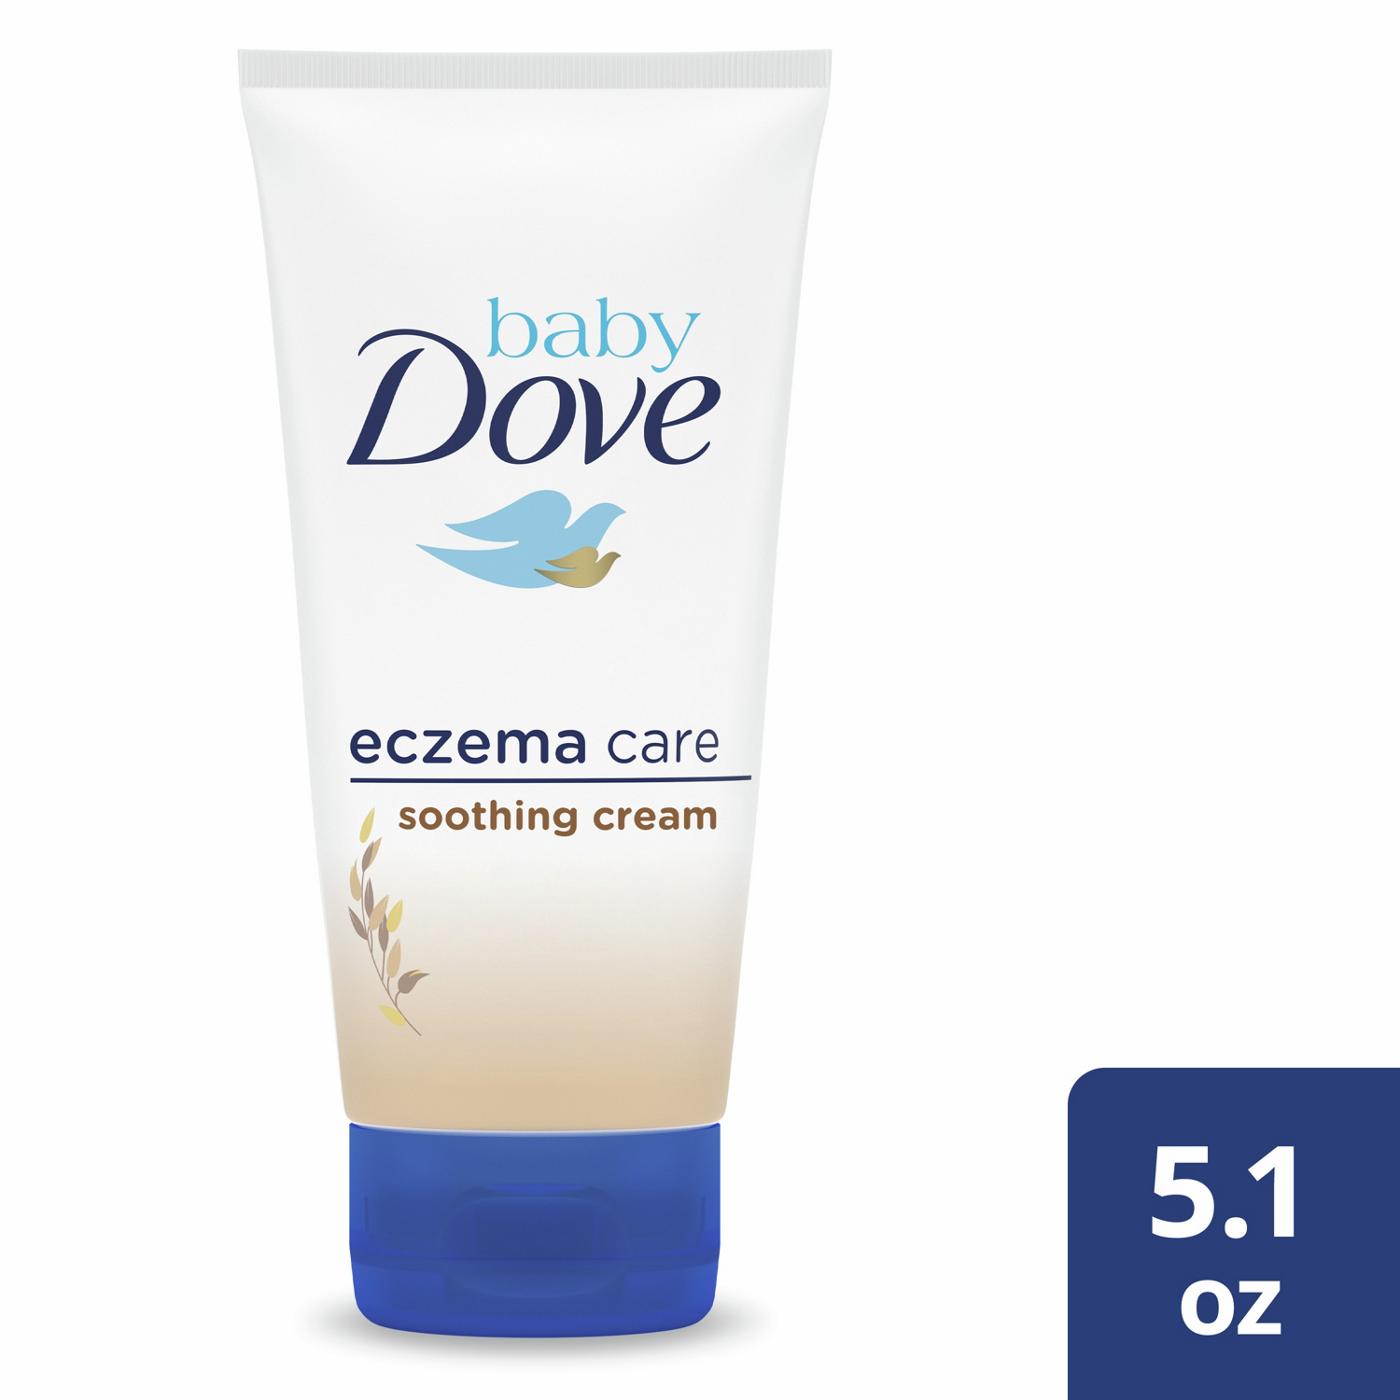 Baby Dove Eczema Care Soothing Cream; image 3 of 5